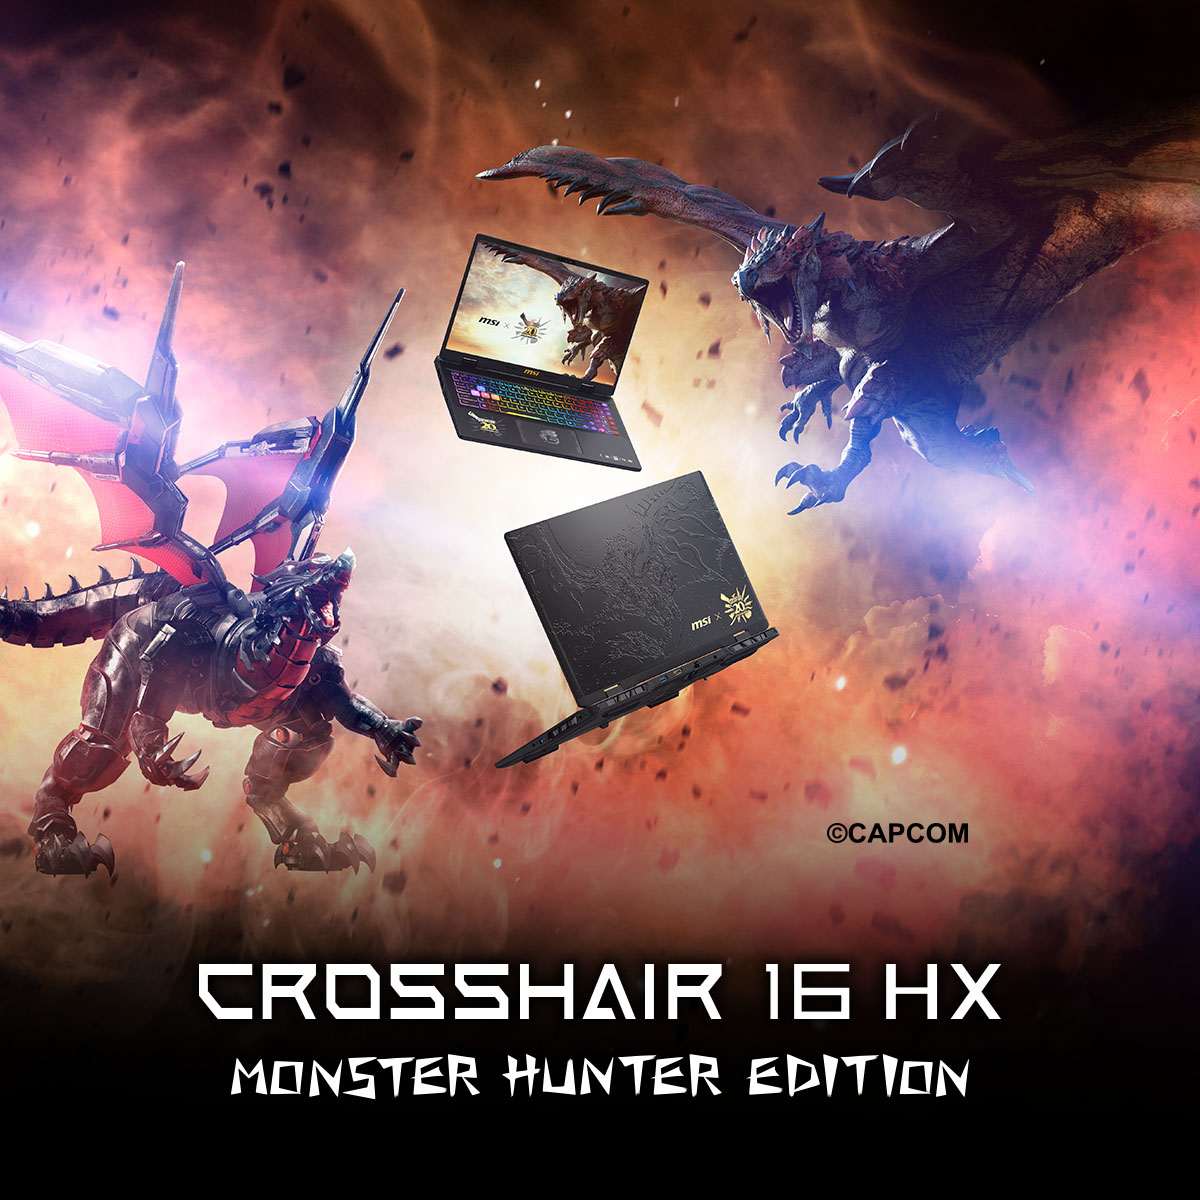 With CAPCOM's iconic gaming elements and MSI’s superior craftsmanship, Crosshair 16 HX MONSTER HUNTER EDITION delivers an unparalleled gaming experience.

msi.gm/Crosshair16HX_…

#MSICrosshair #monsterhunter #Gaming #Gaminglaptop